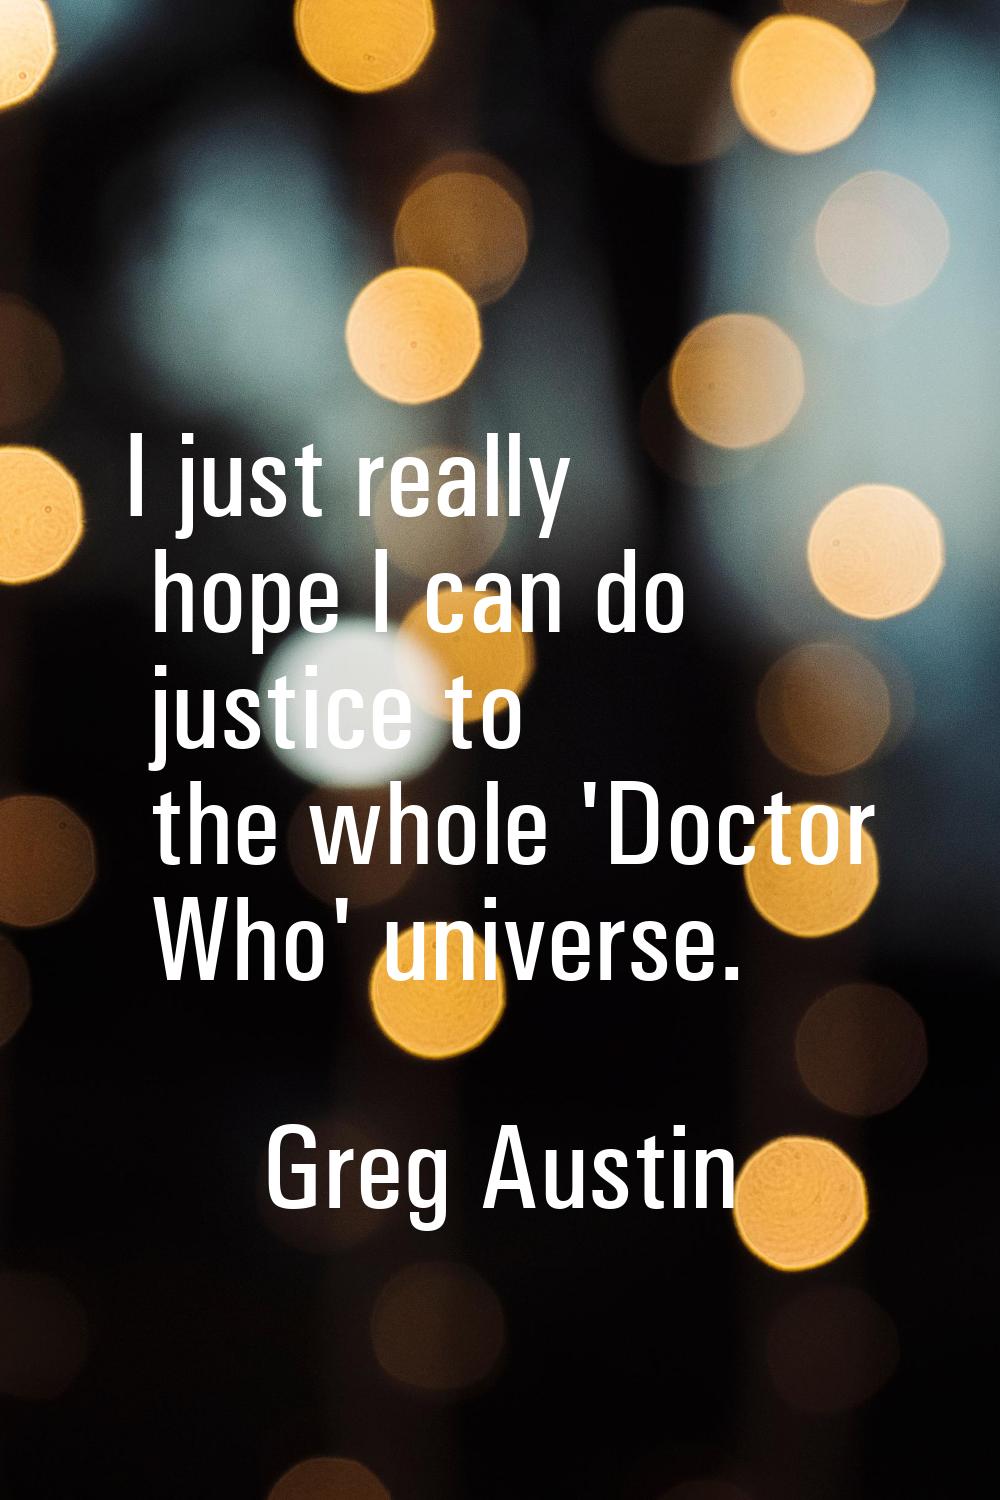 I just really hope I can do justice to the whole 'Doctor Who' universe.